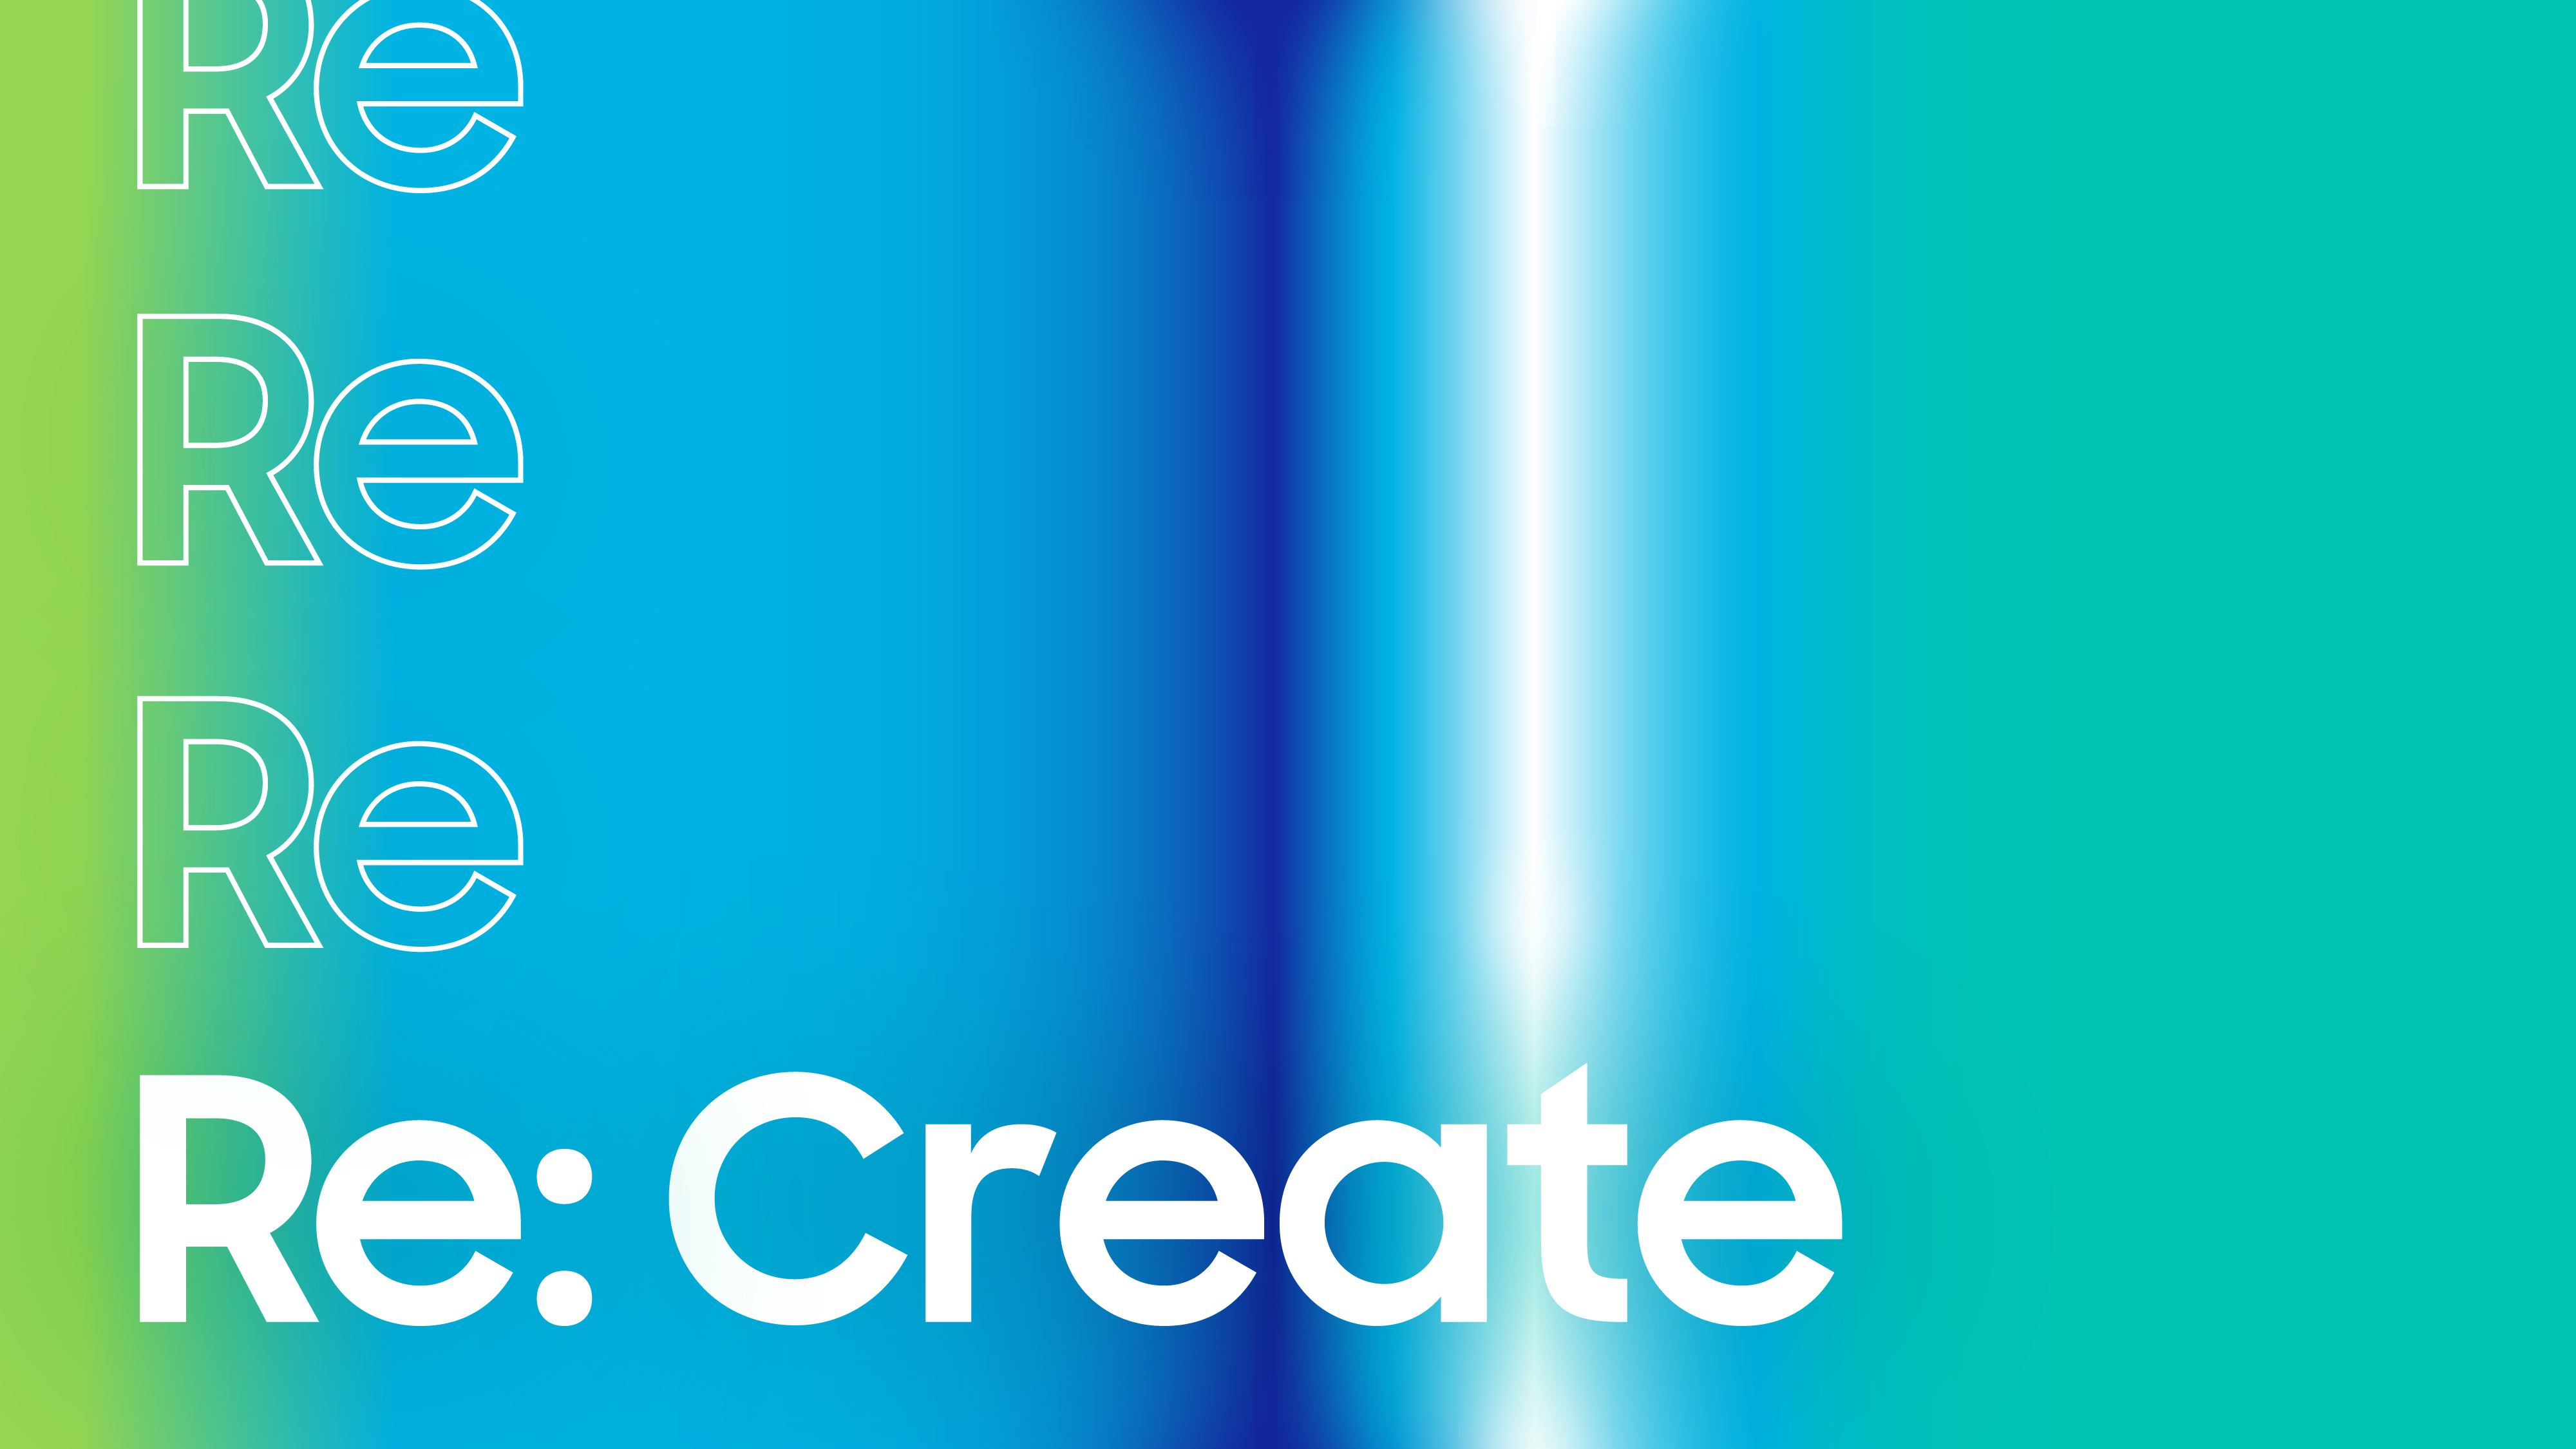 Recreate is written over a gradient background with green and blue centers.